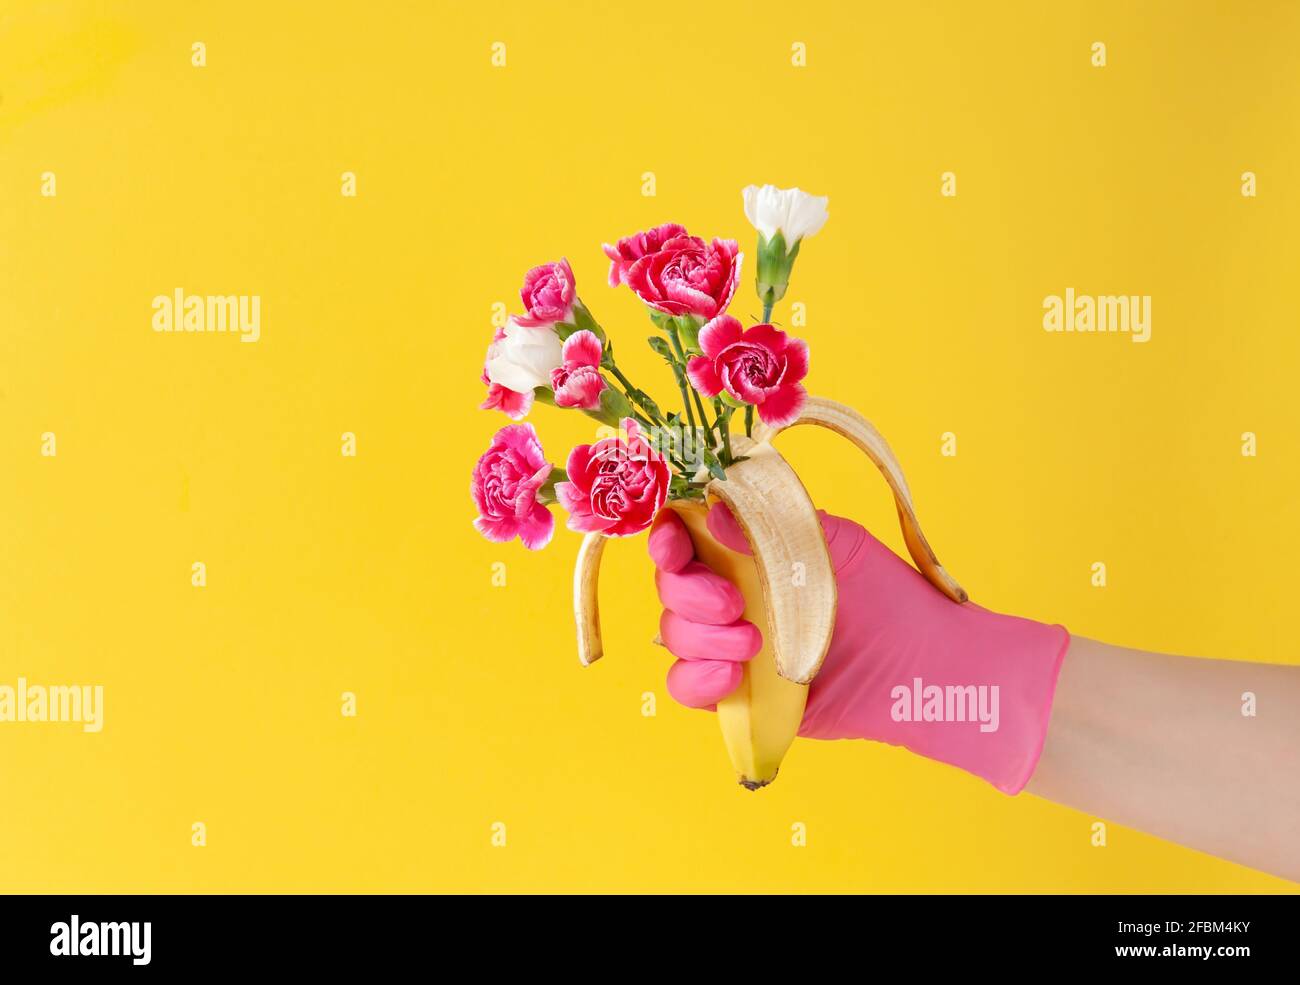 Creative arrangement with female hand in pink glove and  banana fruit with bouquet with colorful flowers over bright yellow background. Minimal  conce Stock Photo